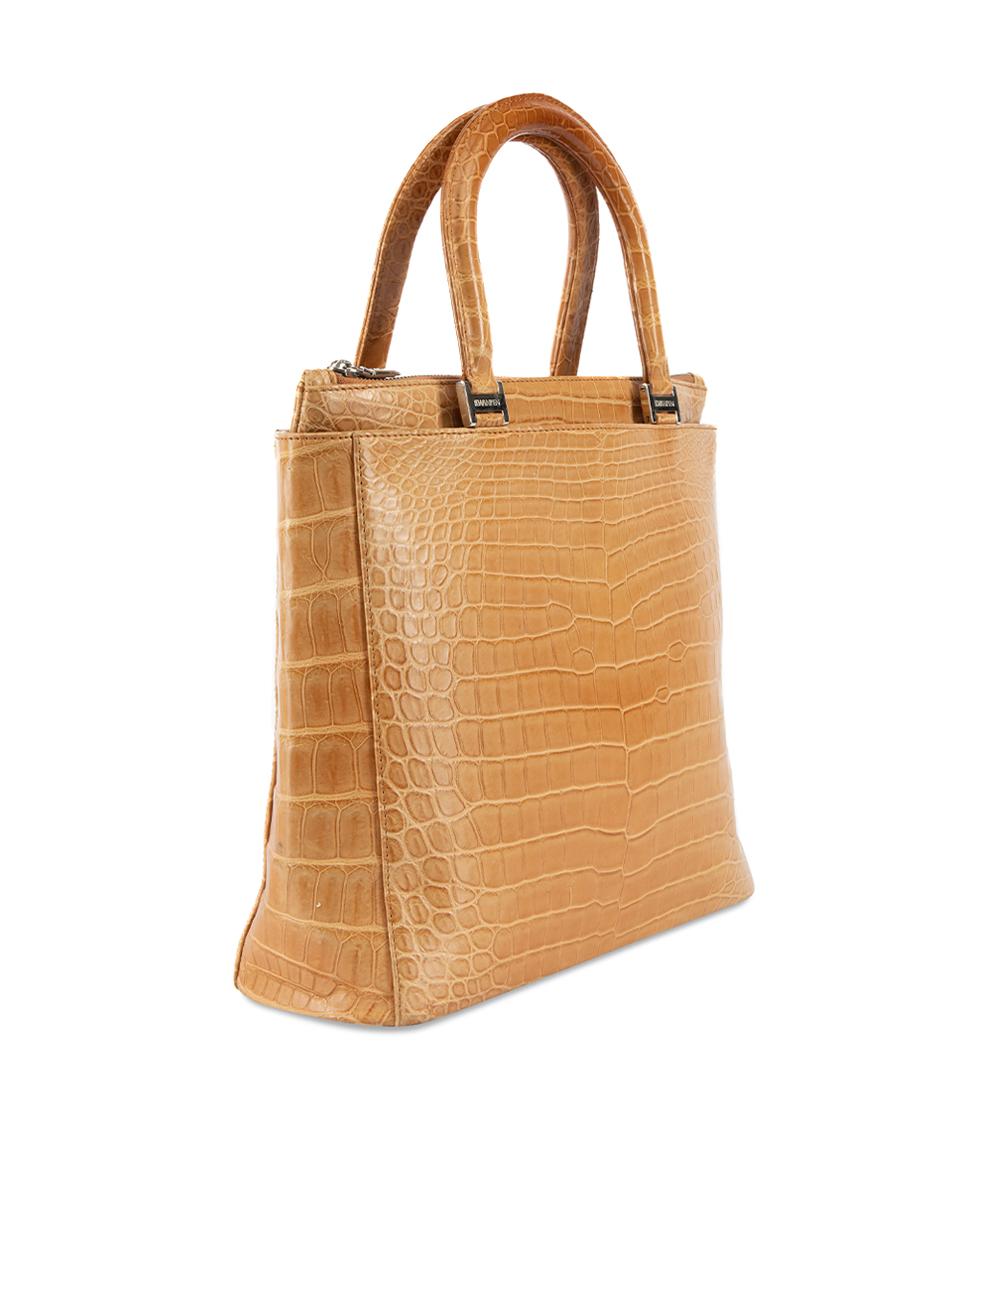 CONDITION is Very good. Minimal wear to bag is evident. Minimal creasing and scuffs to the exterior leather on this used KWANPEN designer resale item. Details Camel Crocodile leather Medium tote bag 2x Top handle Three main compartment Centre zip